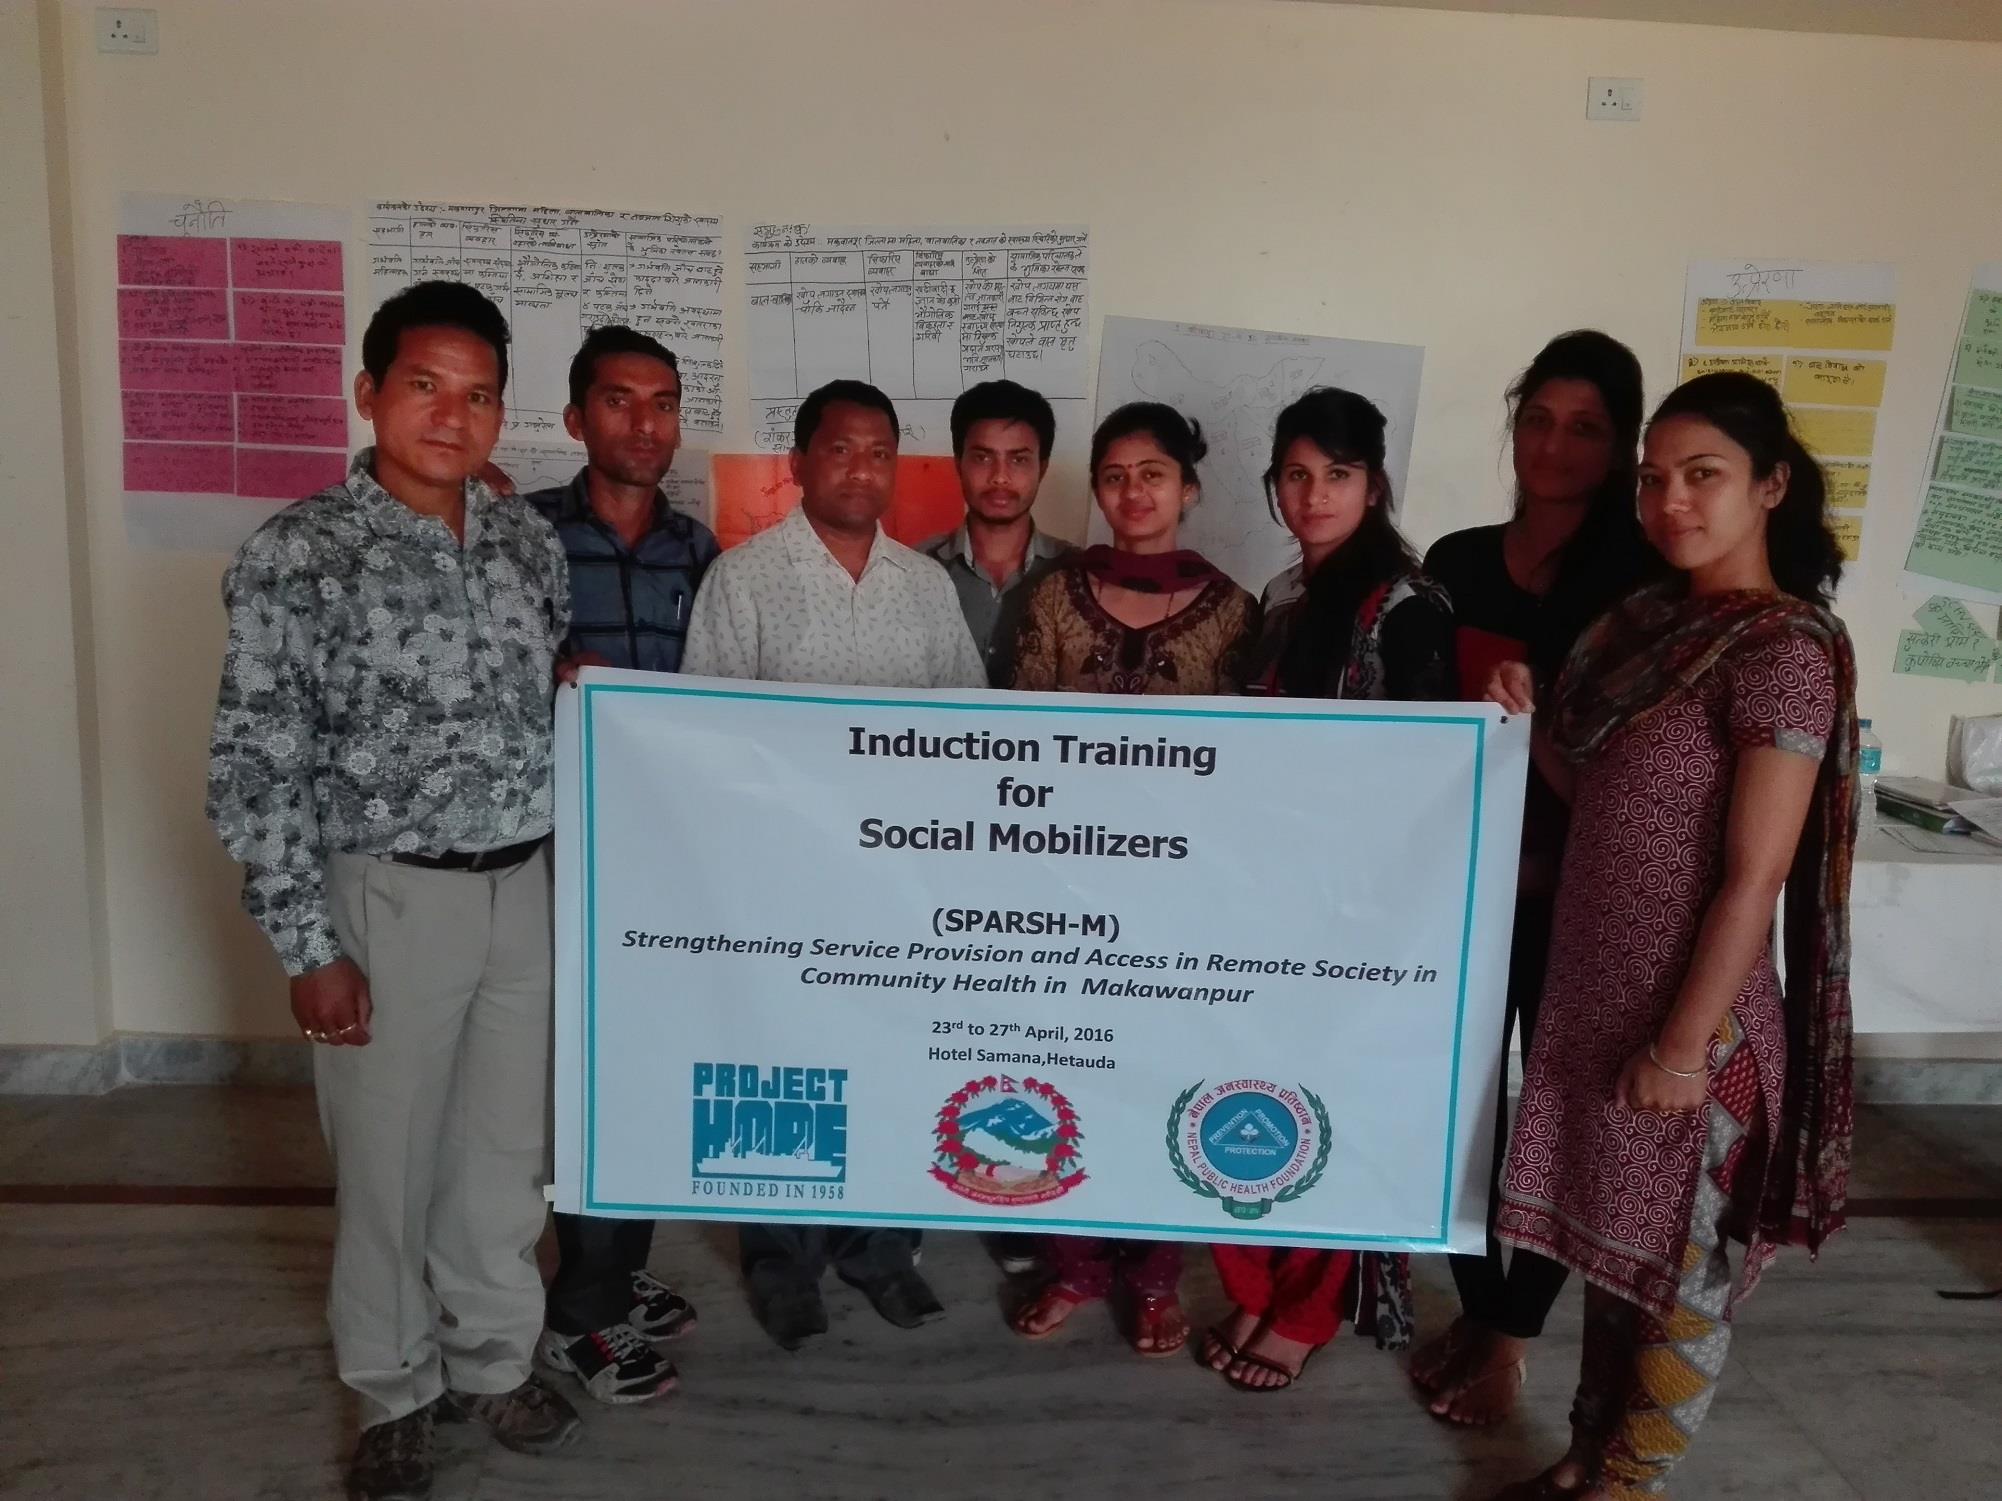 Induction Training for Social Mobilizers